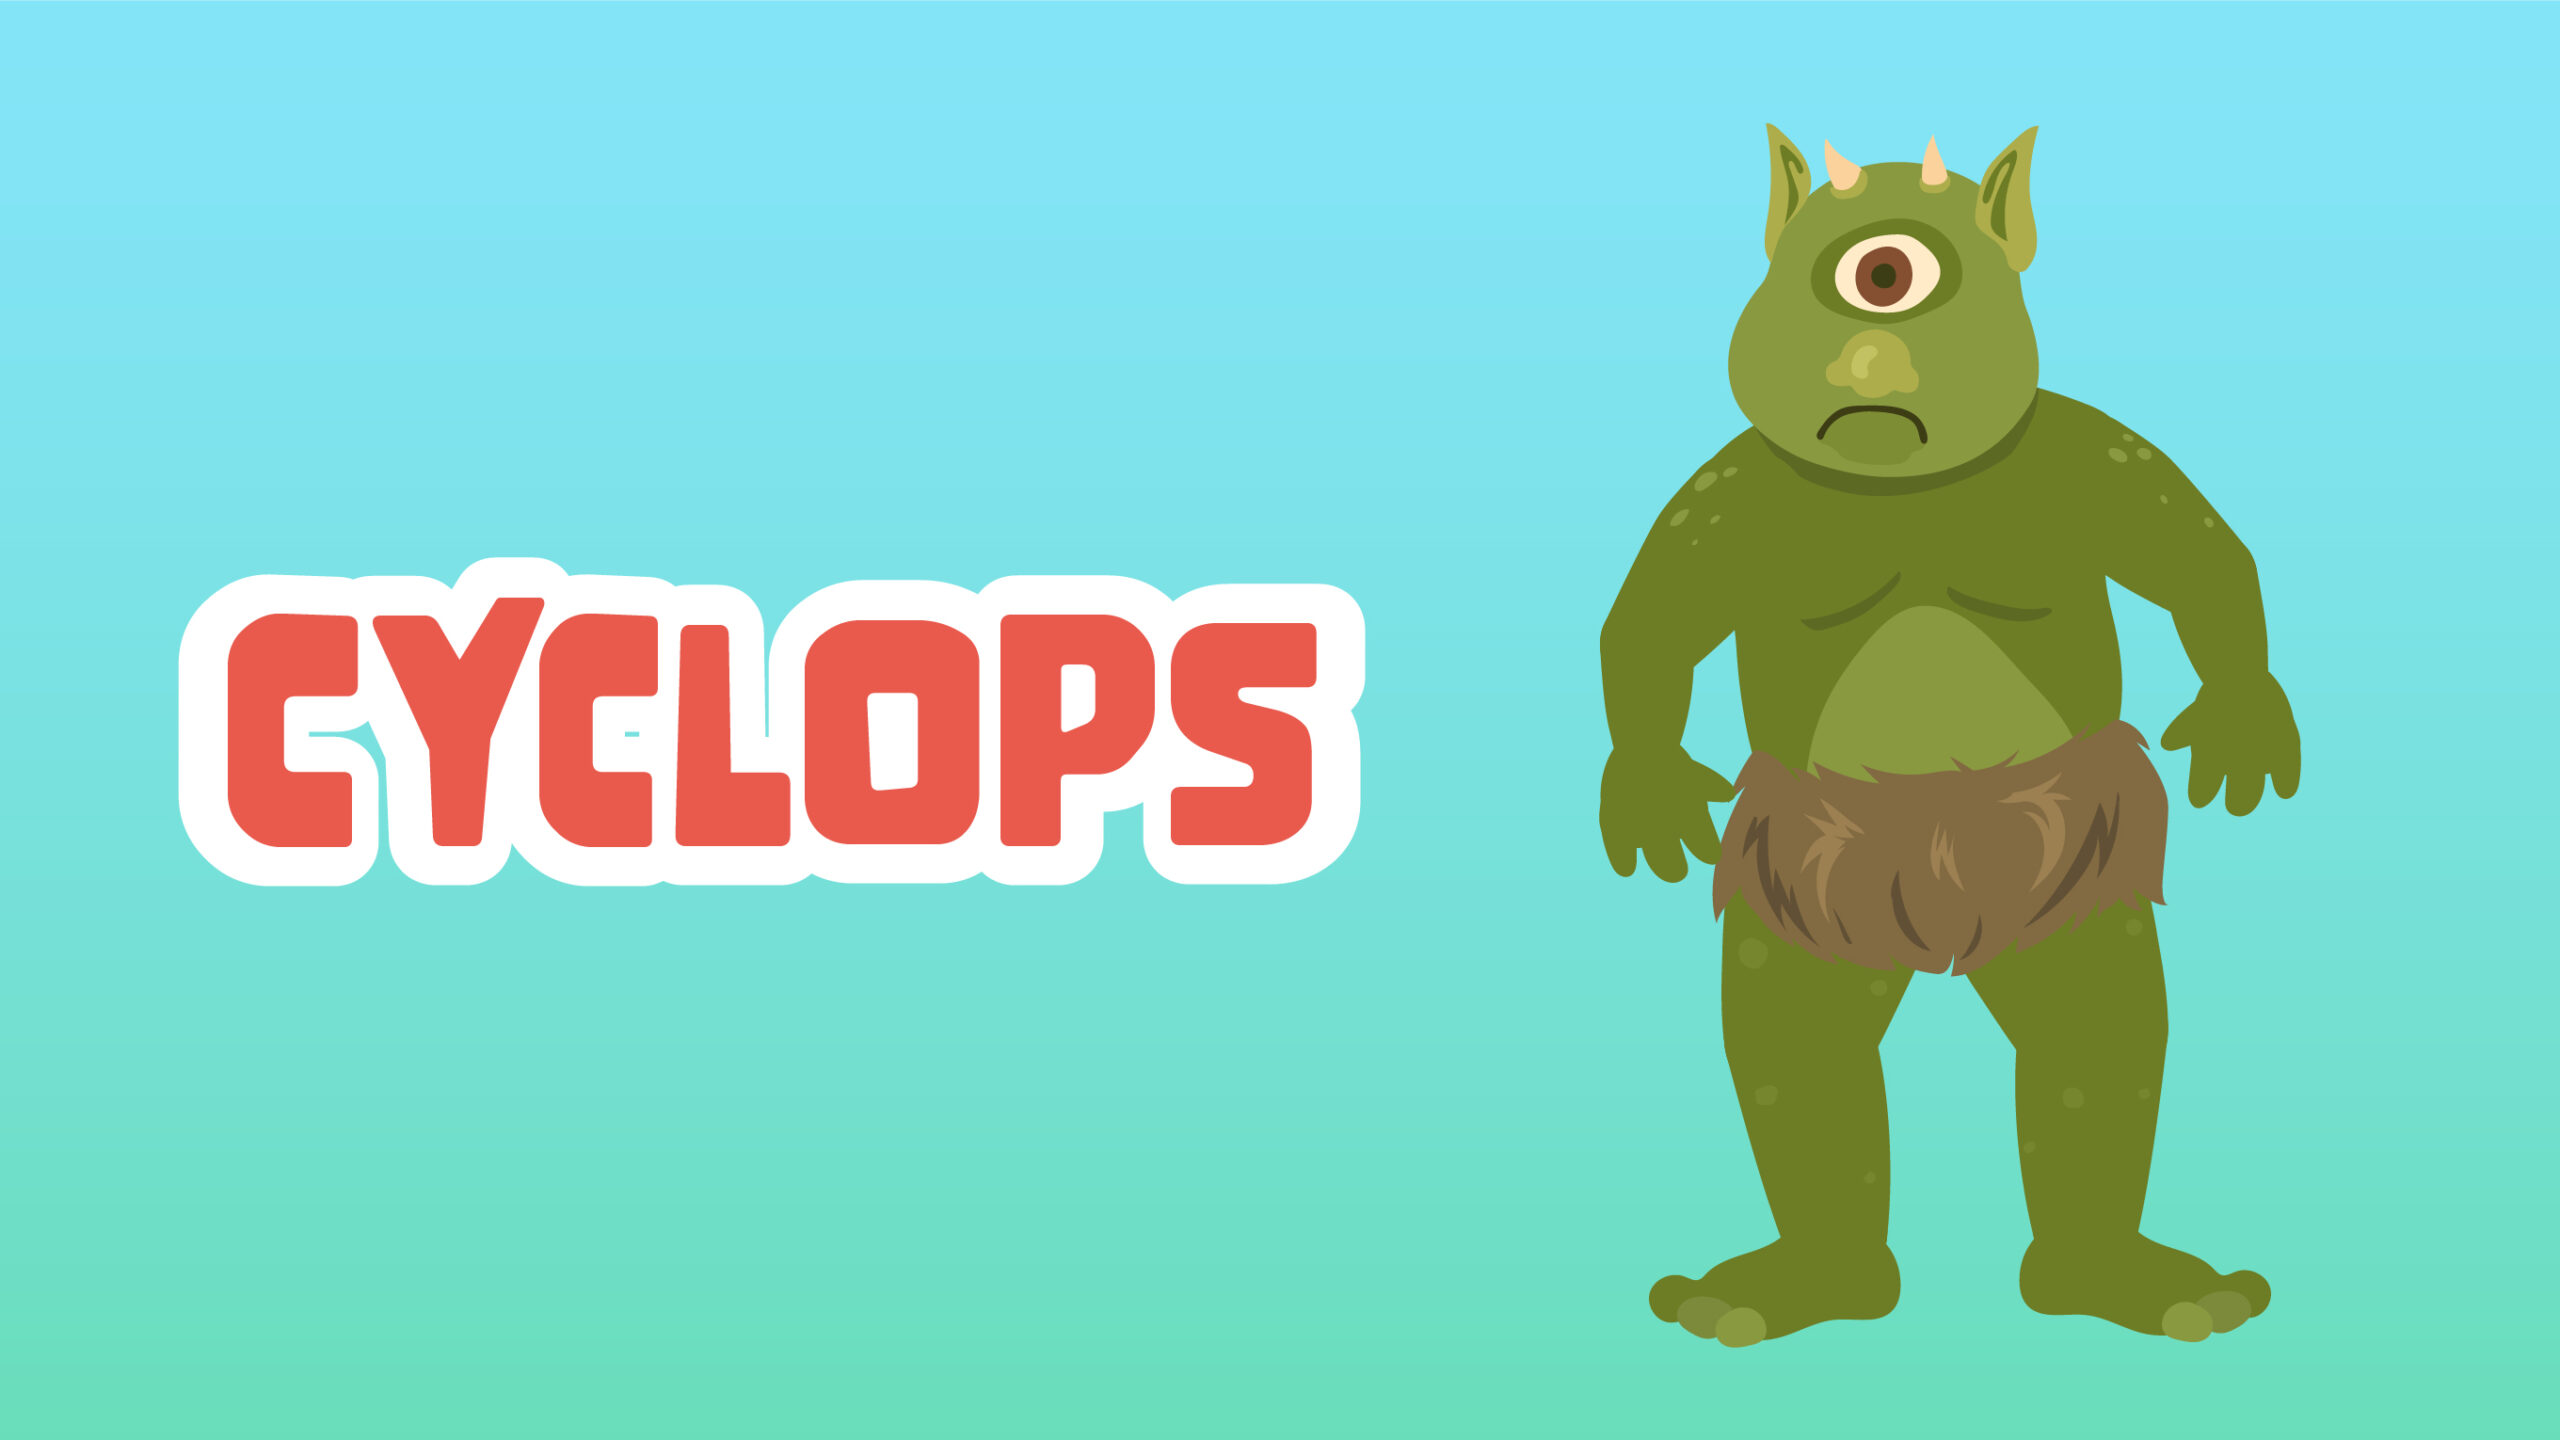 Cyclops Facts for Kids - 5 Spectacular Facts about Cyclops - LearningMole